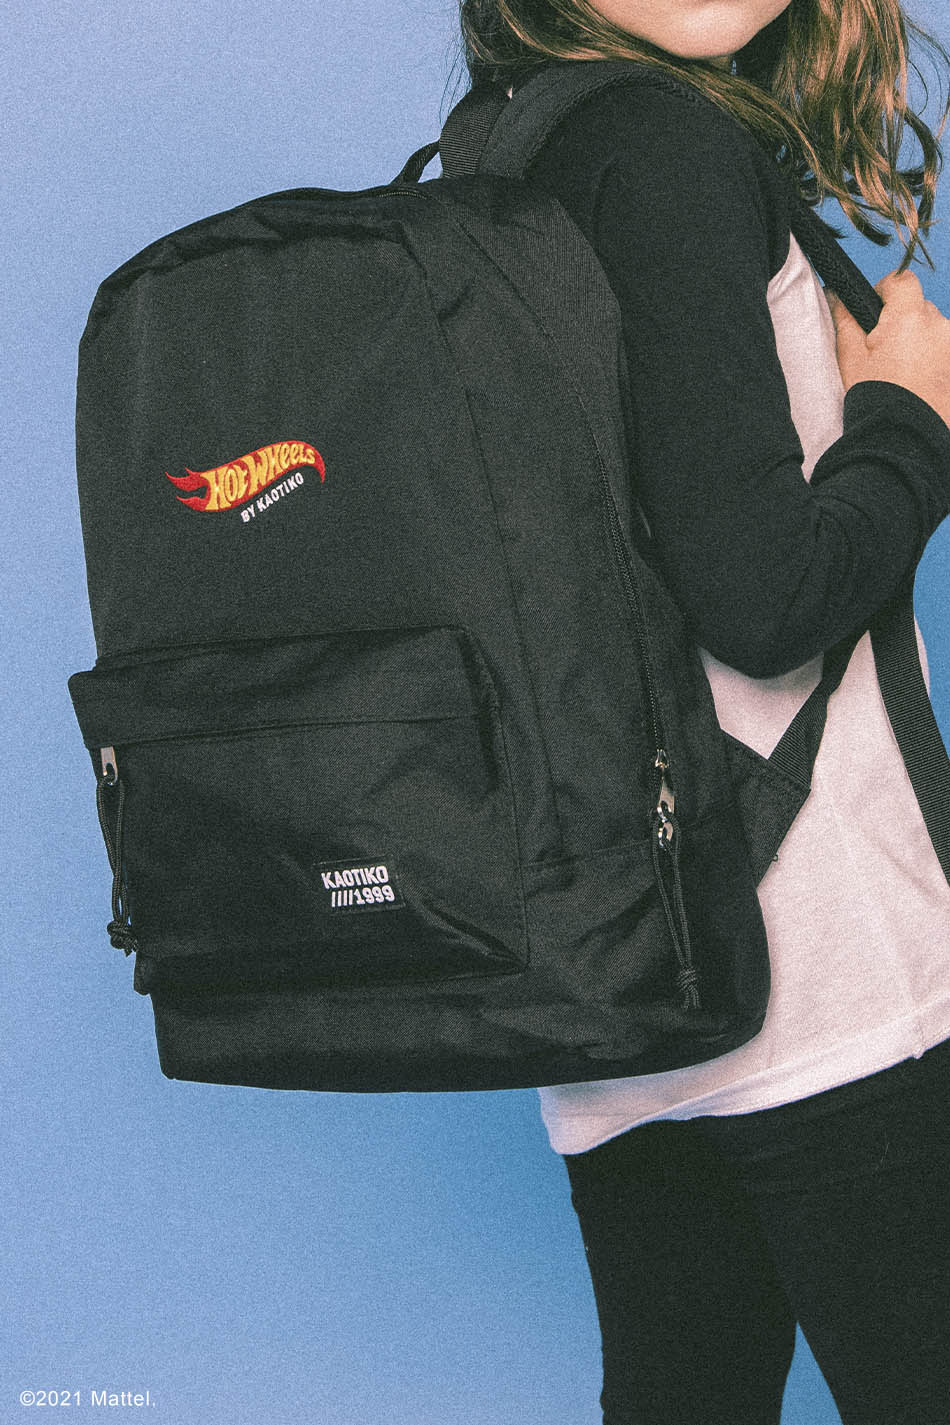 Hot Wheels Backpack by Kaotiko